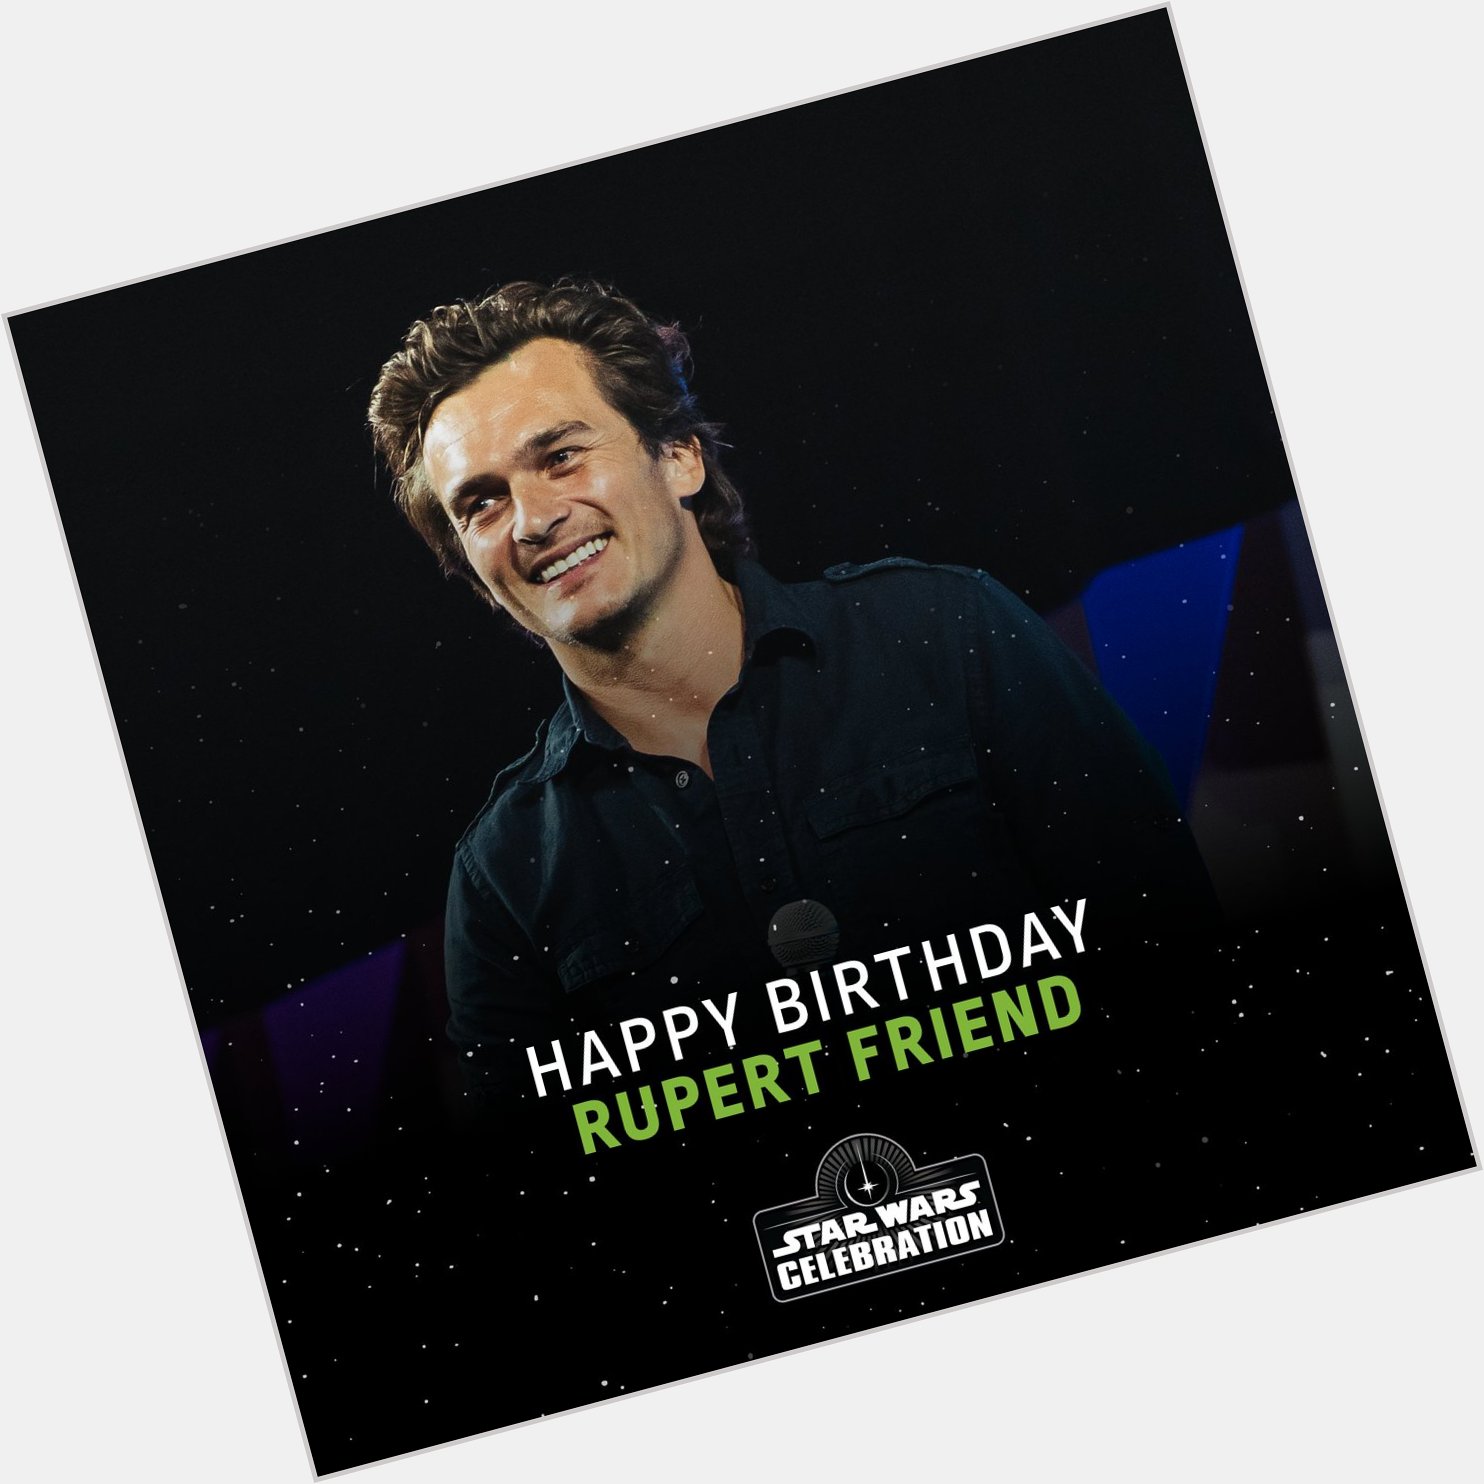 Wishing the Grand Inquisitor himself, Rupert Friend, a very happy birthday! 